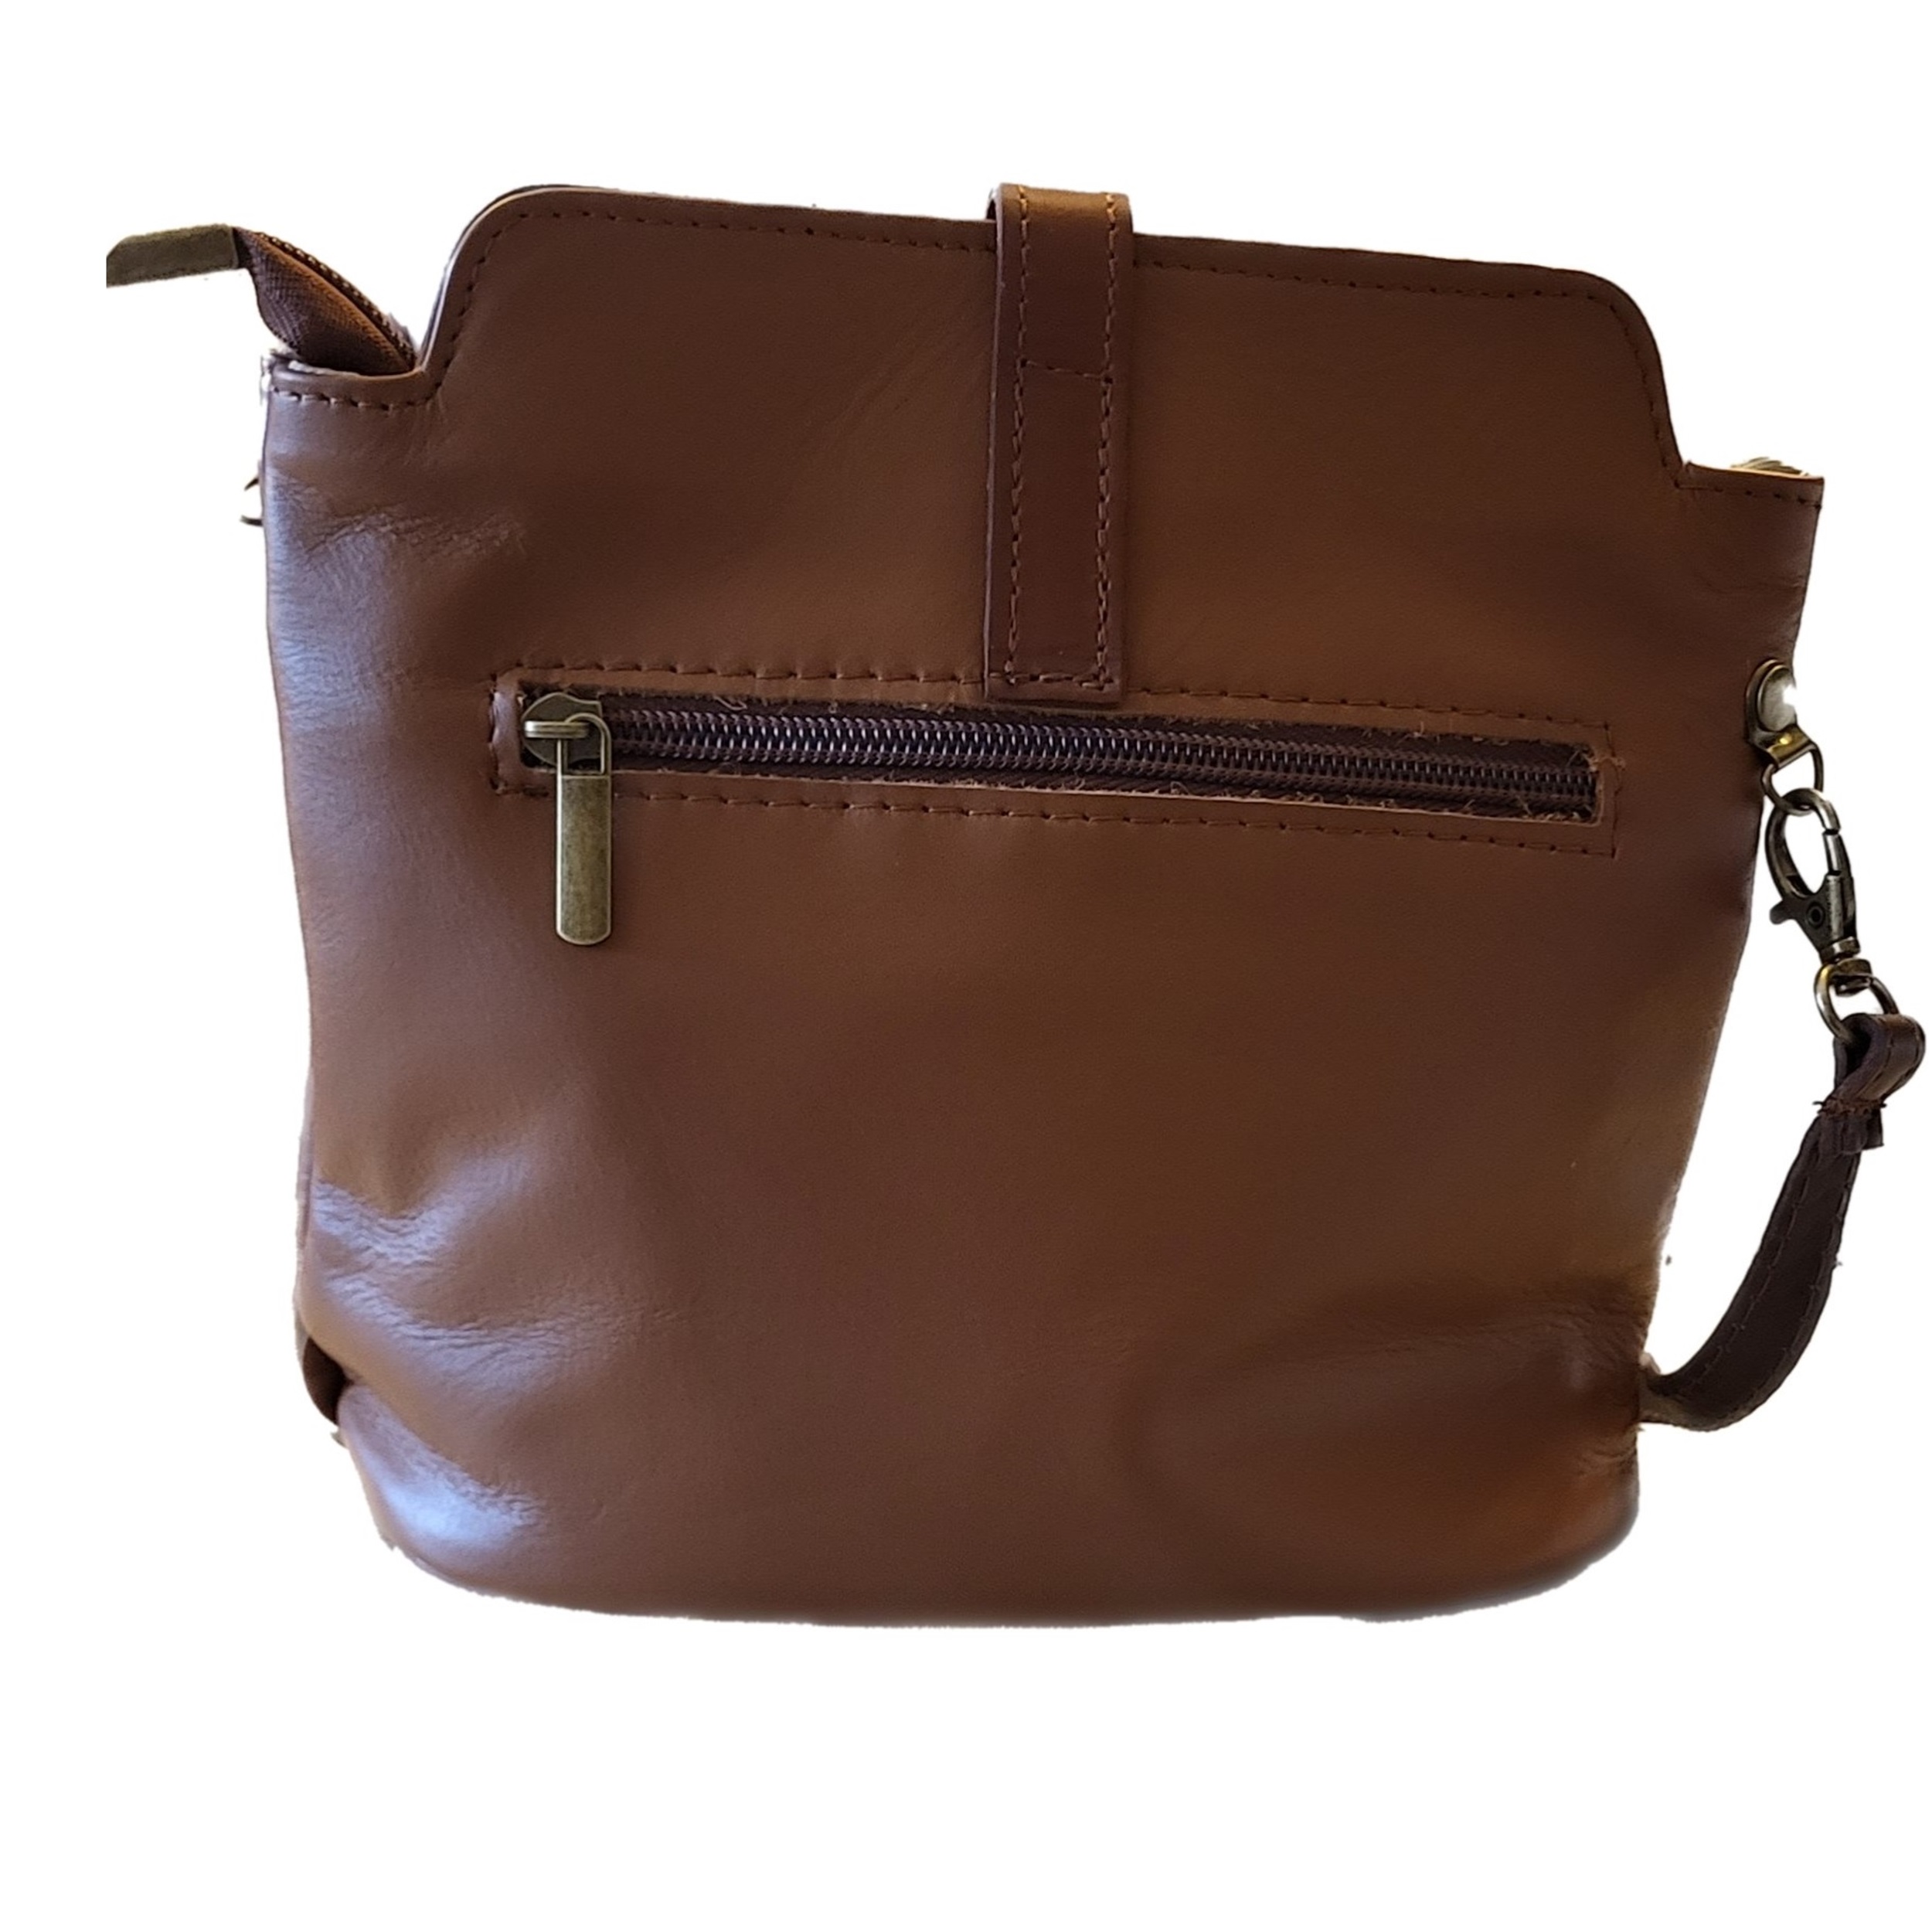 soft brown leather bag with long strap, back view showing zipped pocket,